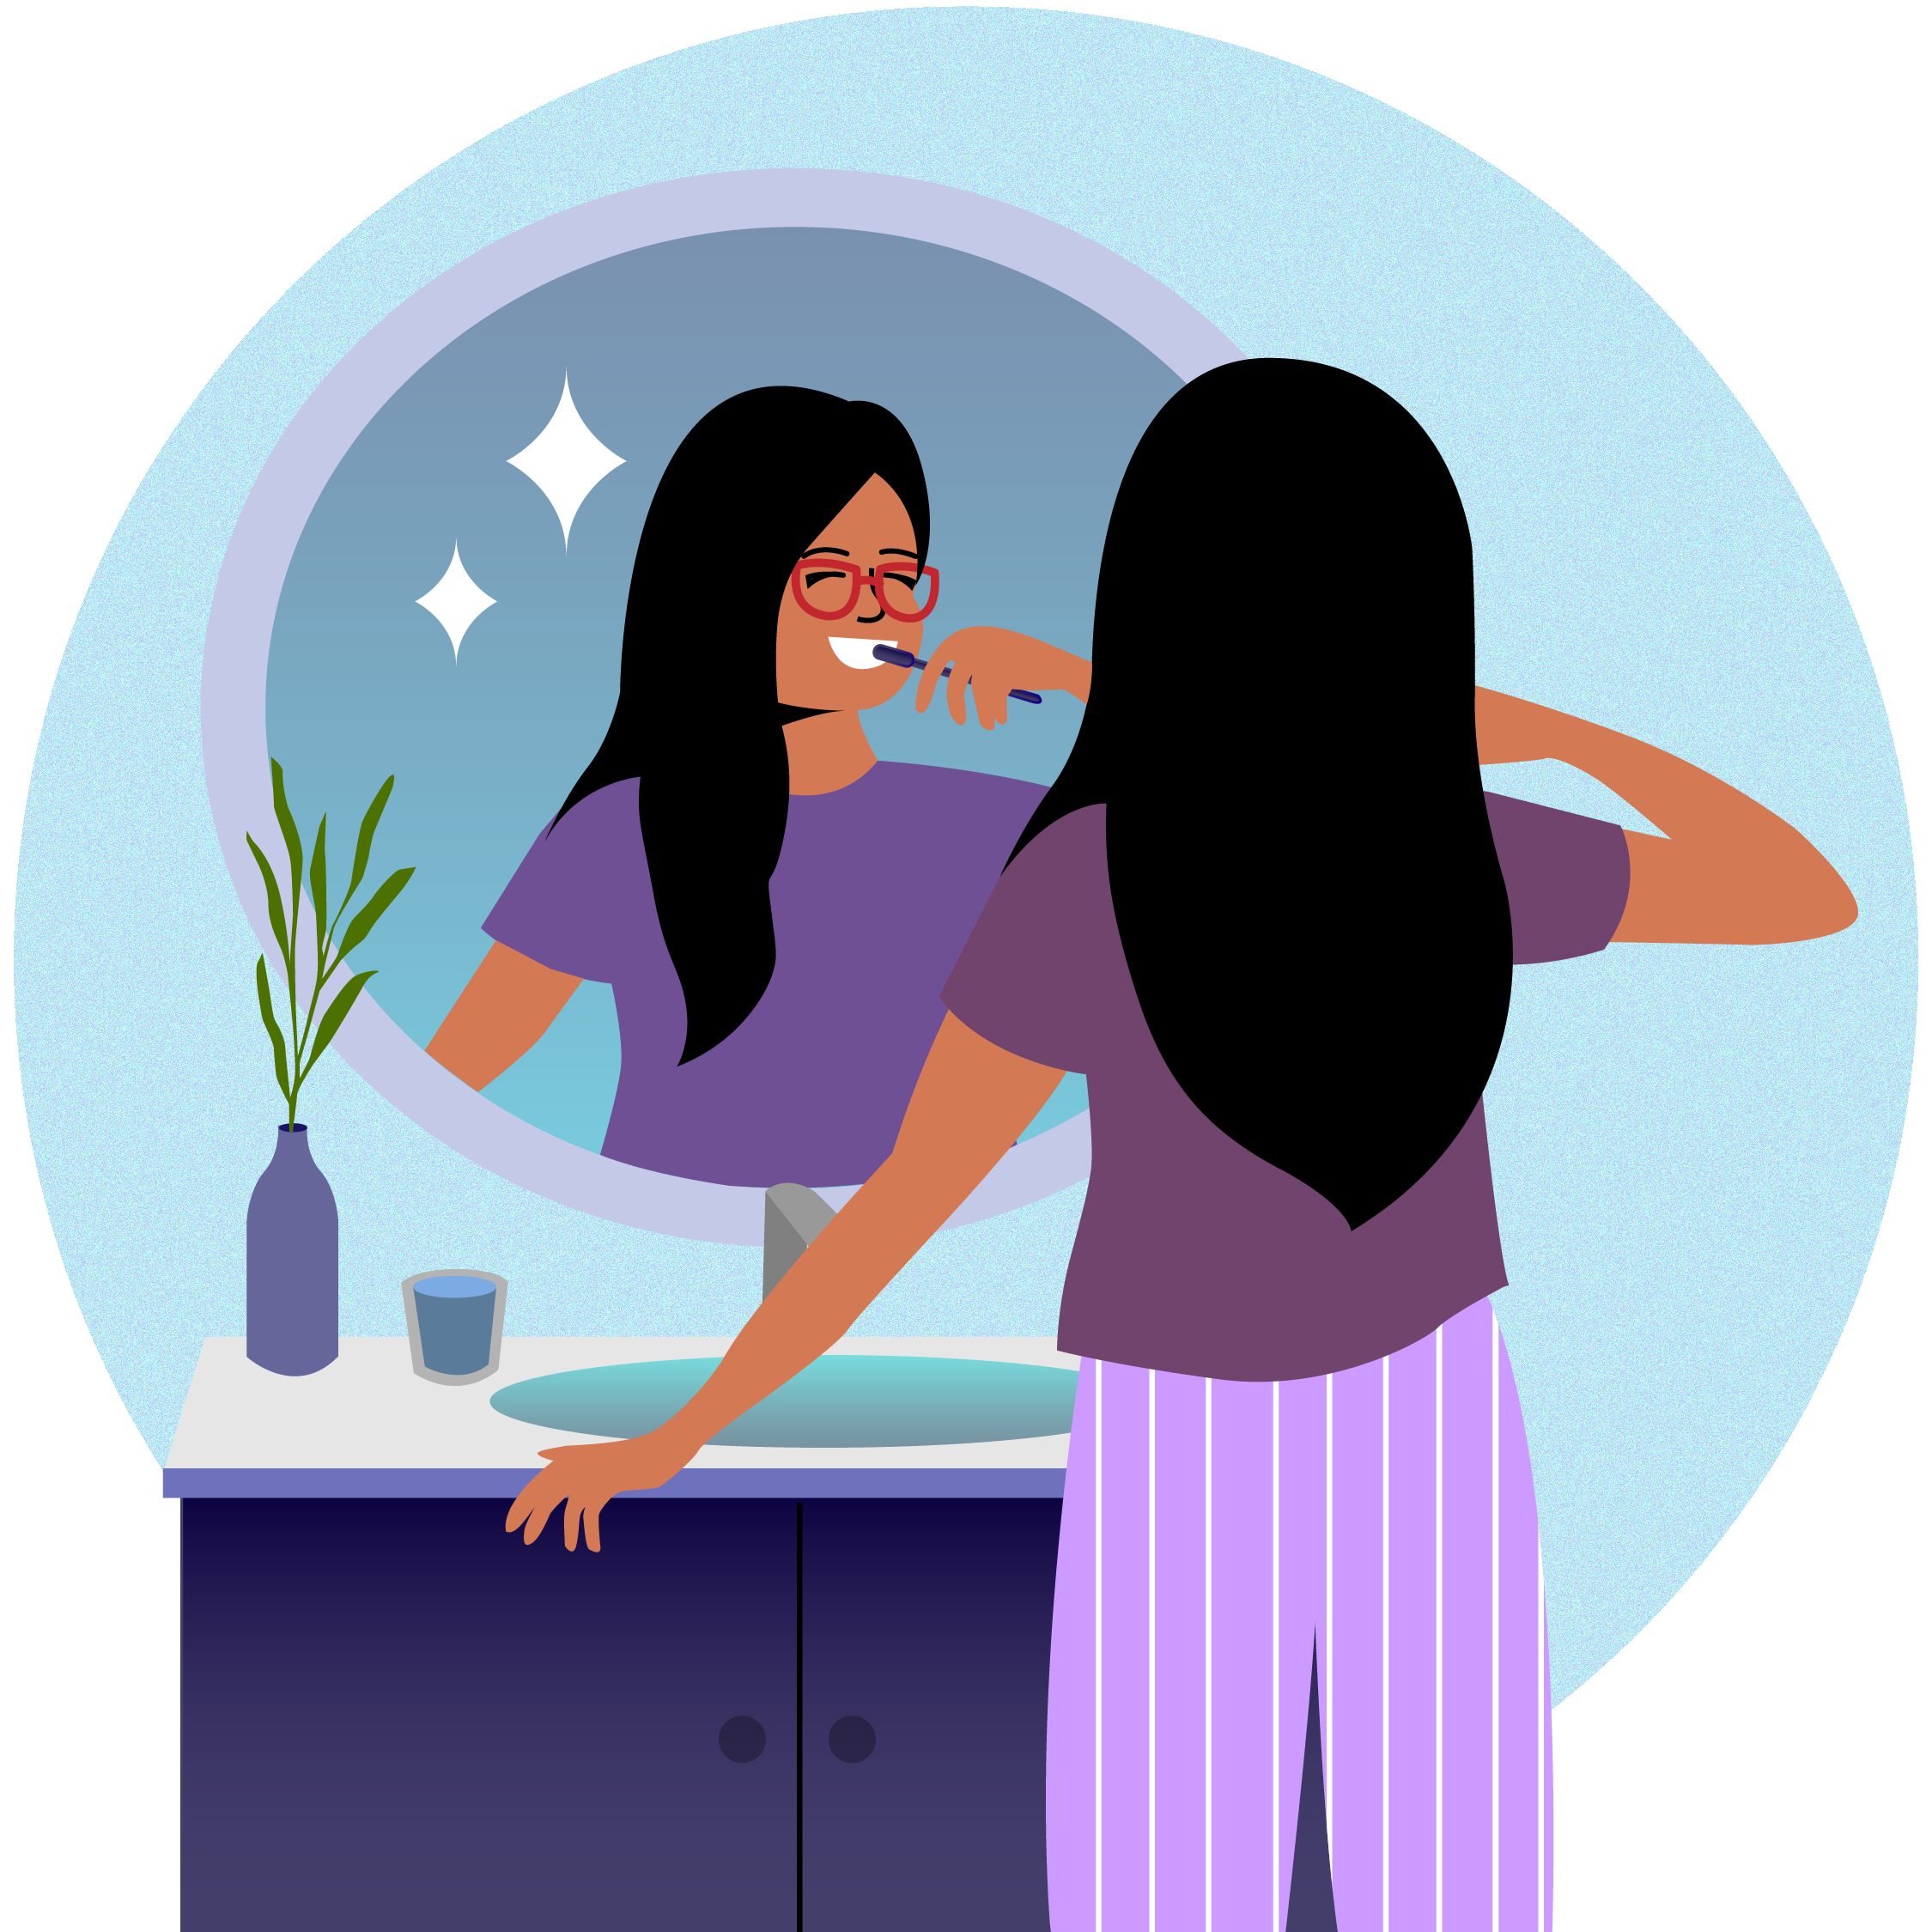 Illustration of a young woman wearing glasses brushing her teeth in front of the bathroom mirror and sink. She is wearing purple pajamas 